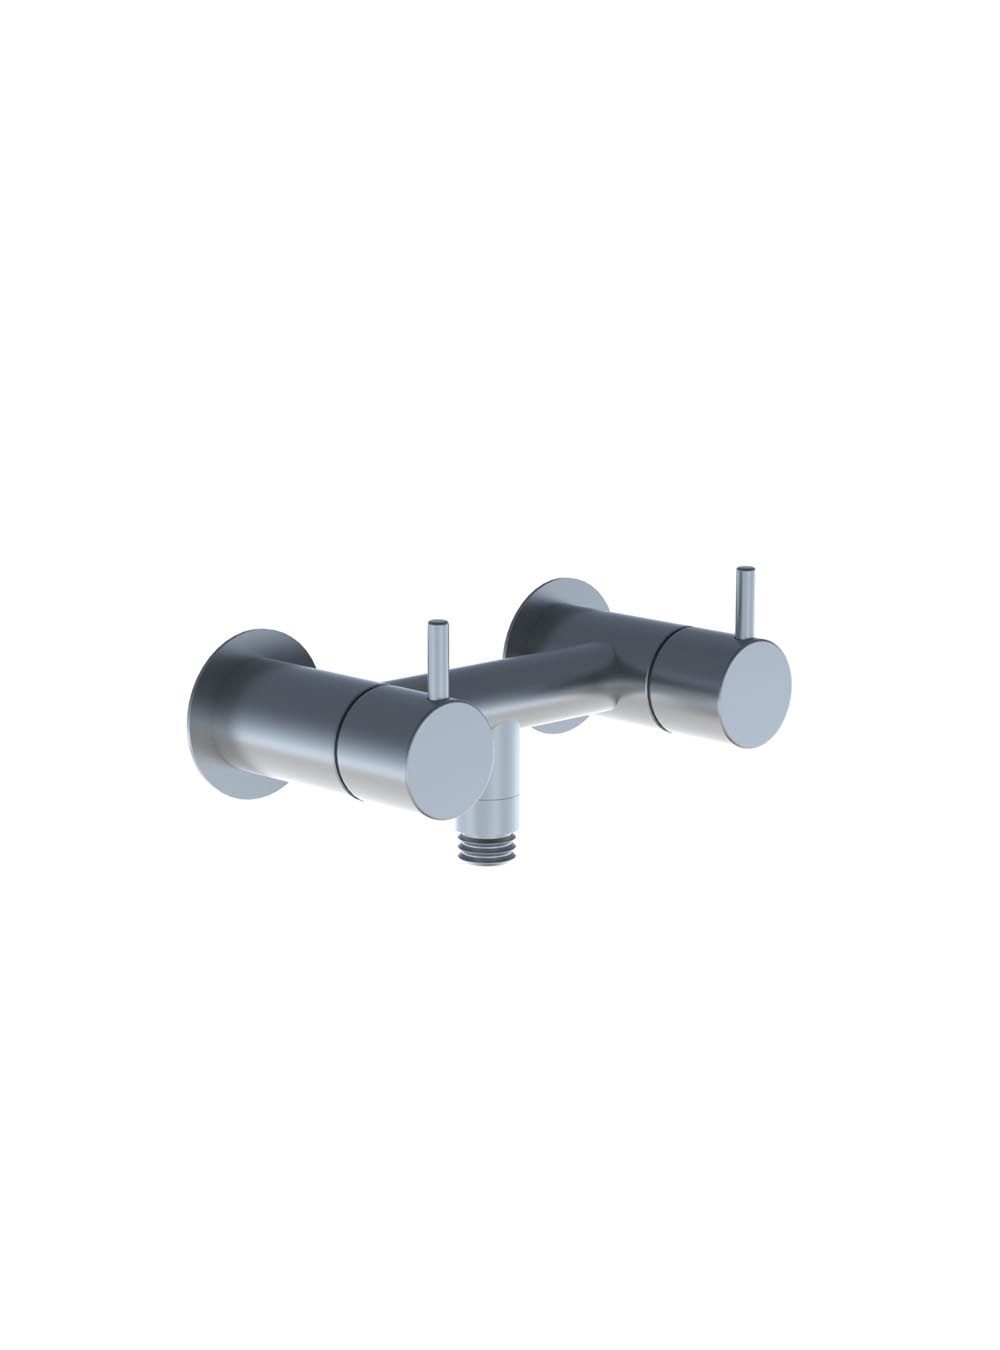 1671-HT2: Two-handle build-in mixer for use with T34 hand shower and rail, 1670, 2 pcs. circular flanges 001G.